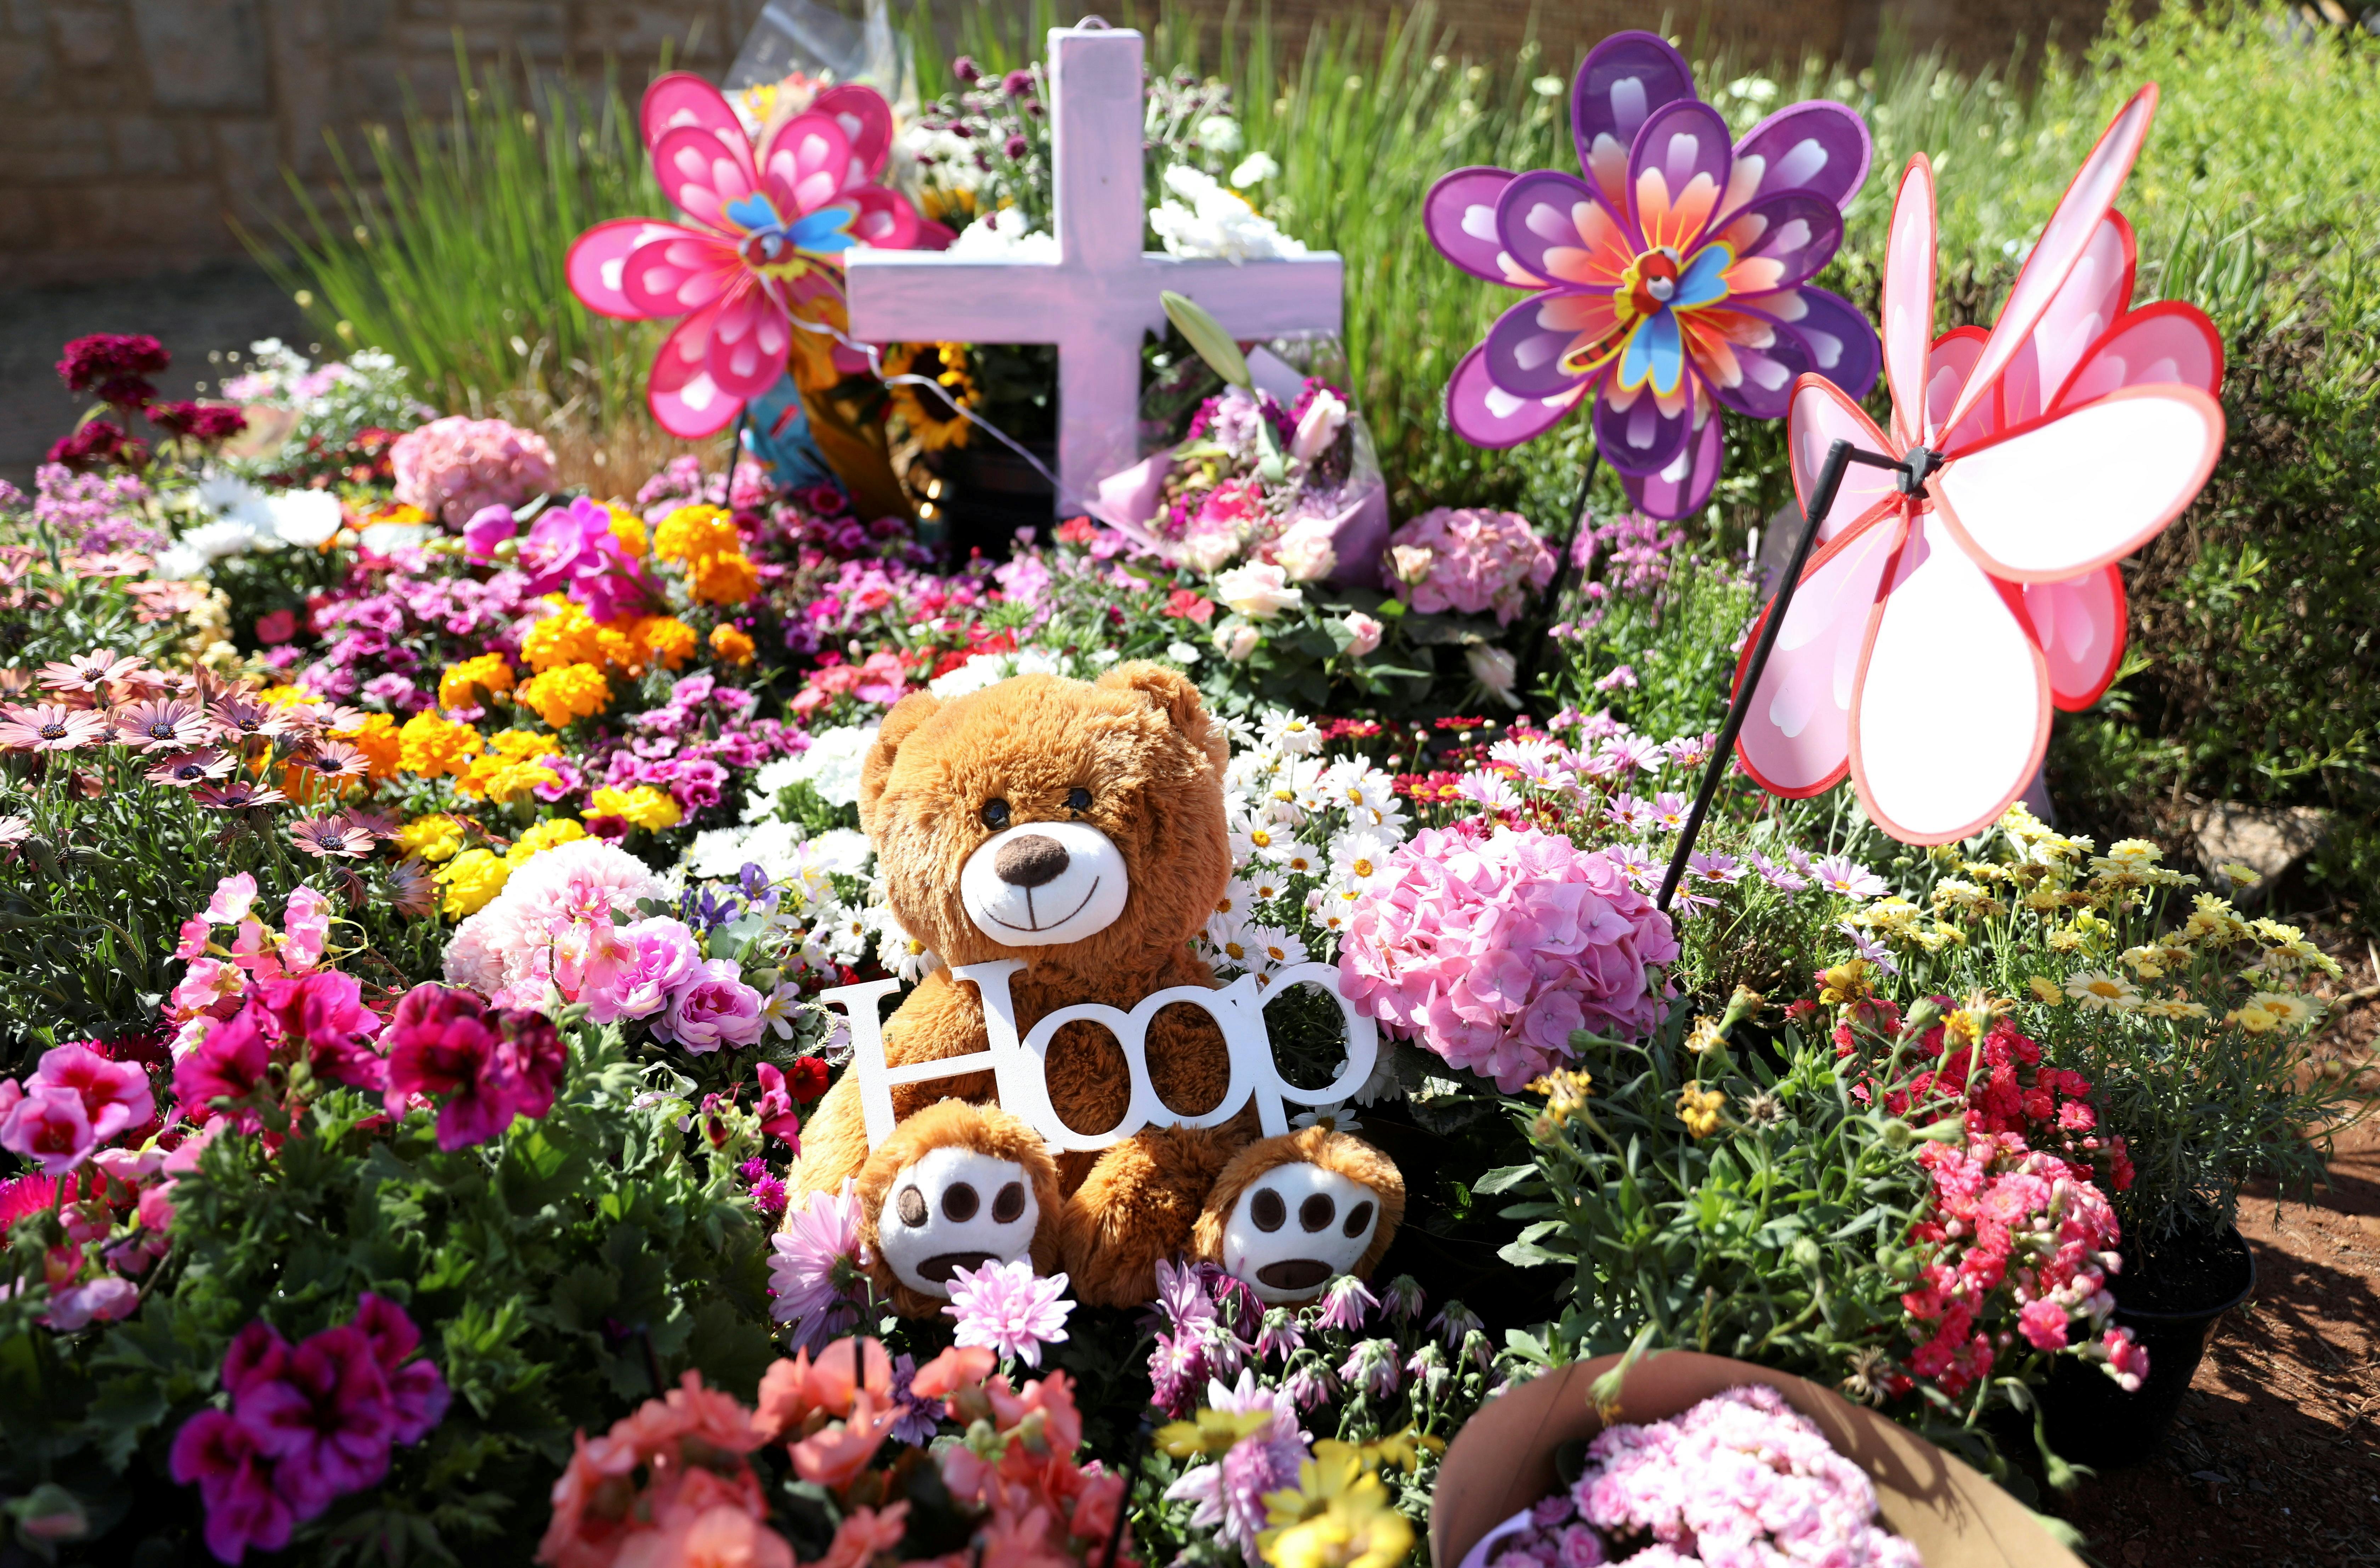 A teddy bear is seen among flowers placed outside where Lauren Anne Dickason, a woman charged with murdering her three young daughters just weeks after arriving in New Zealand from South Africa, used to live, in Pretoria, South Africa, September 24, 2021. REUTERS/Siphiwe Sibeko